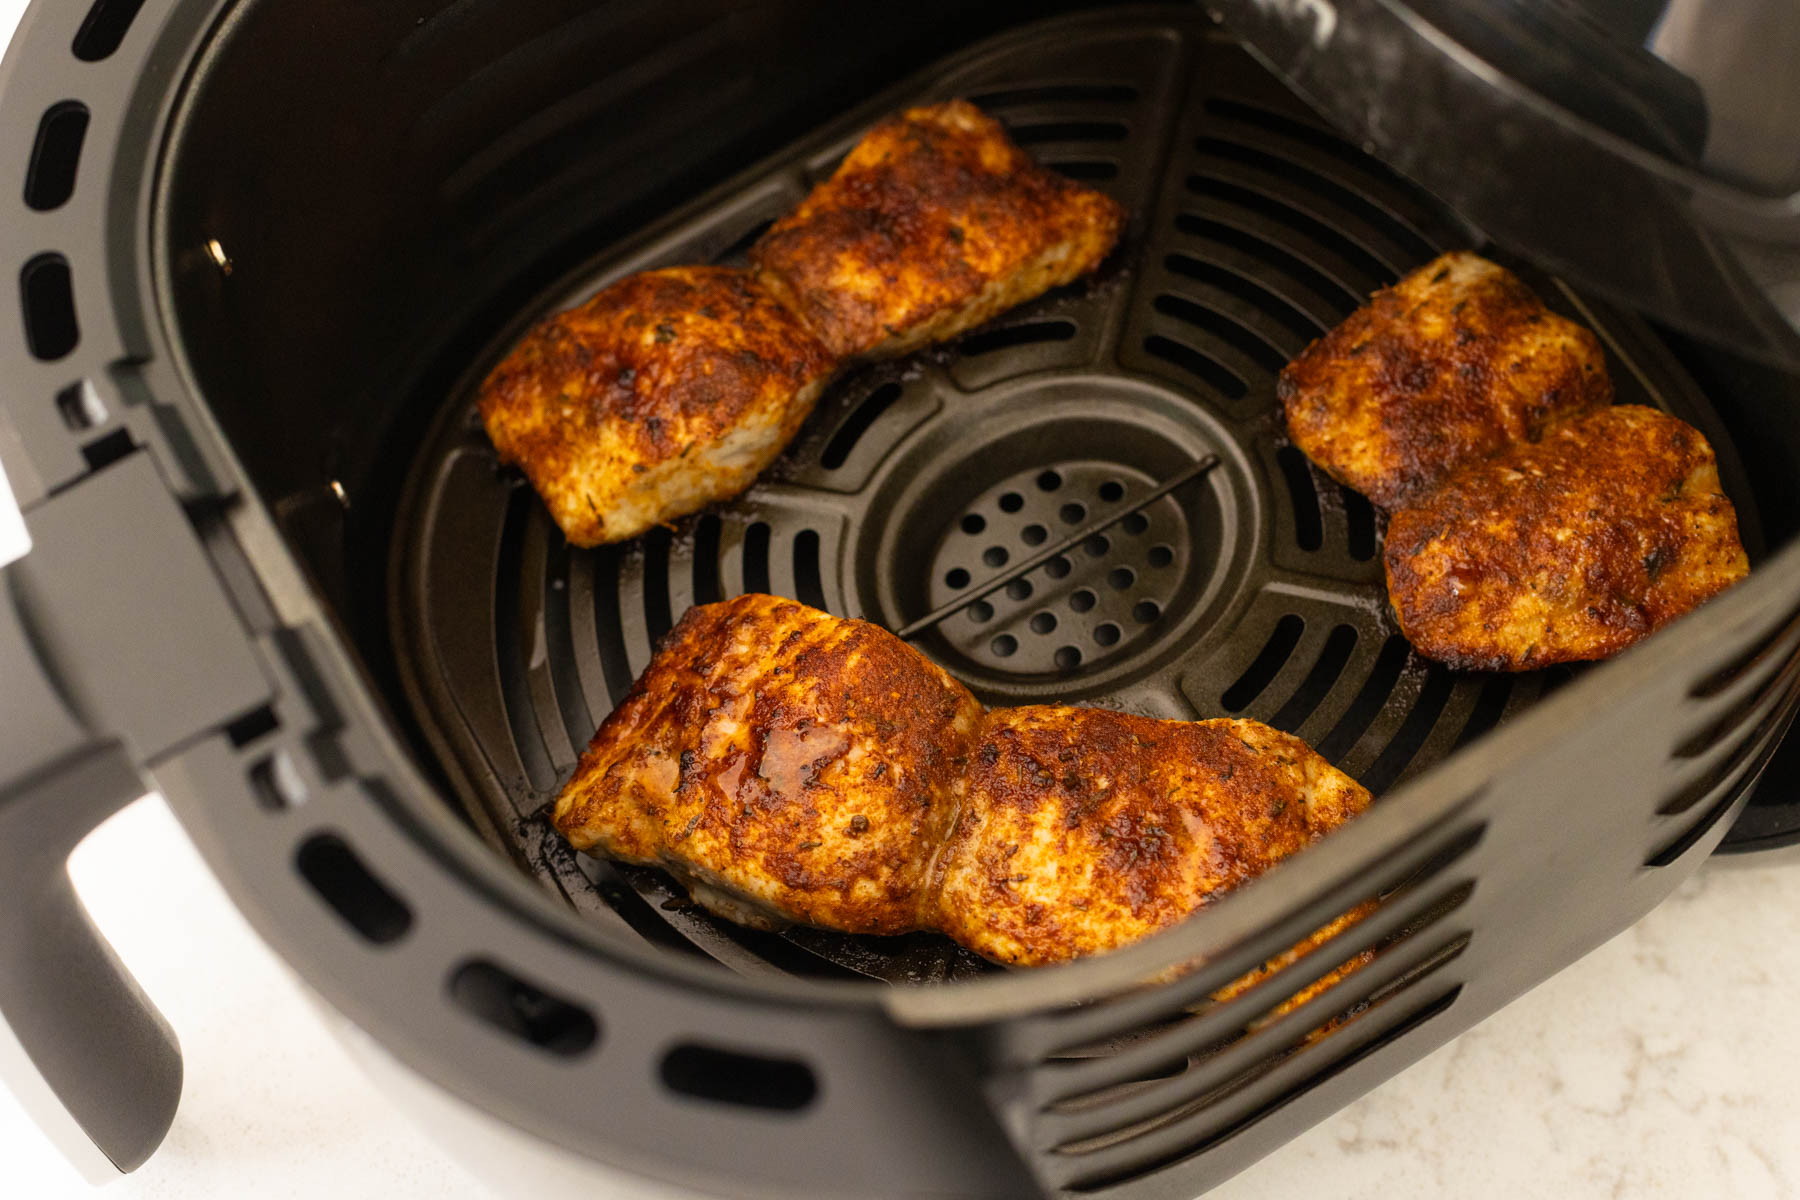 The fish filets are cooking inside an air fryer basket.